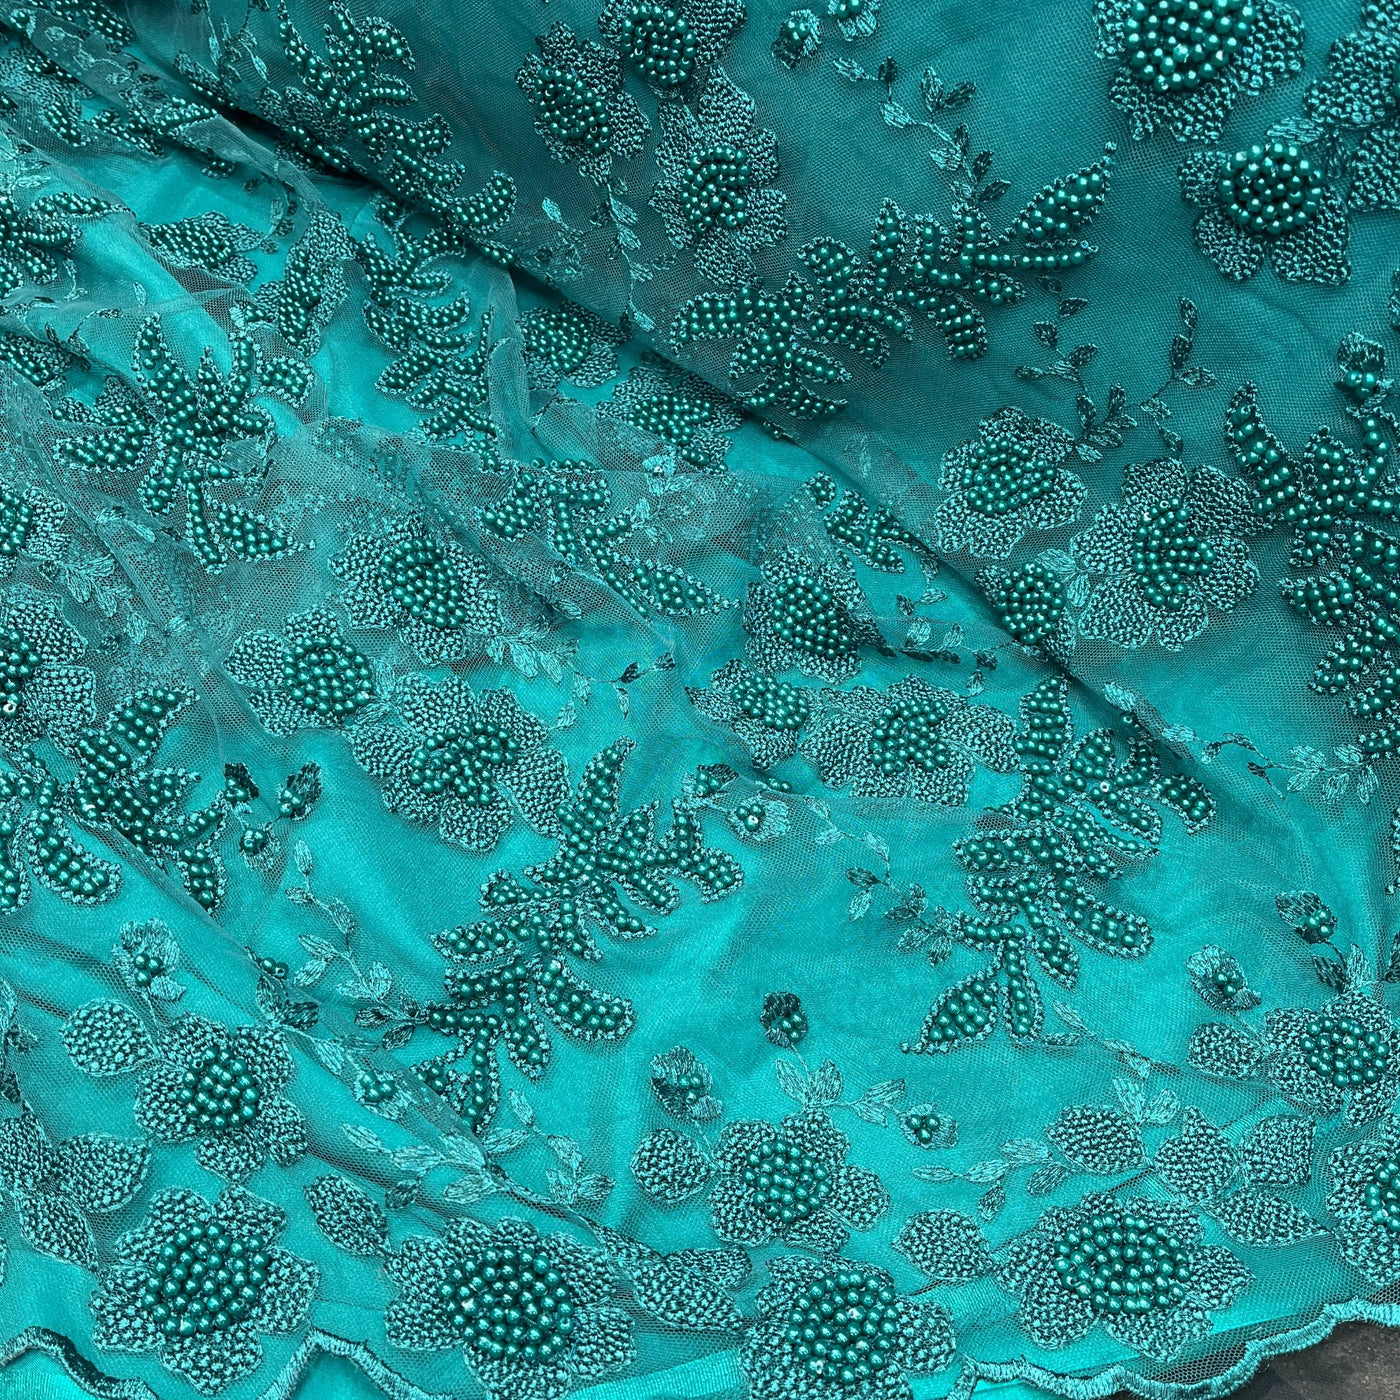 Beaded Lace Fabric Embroidered on 100% Polyester Net Mesh | Lace USA - GD-366